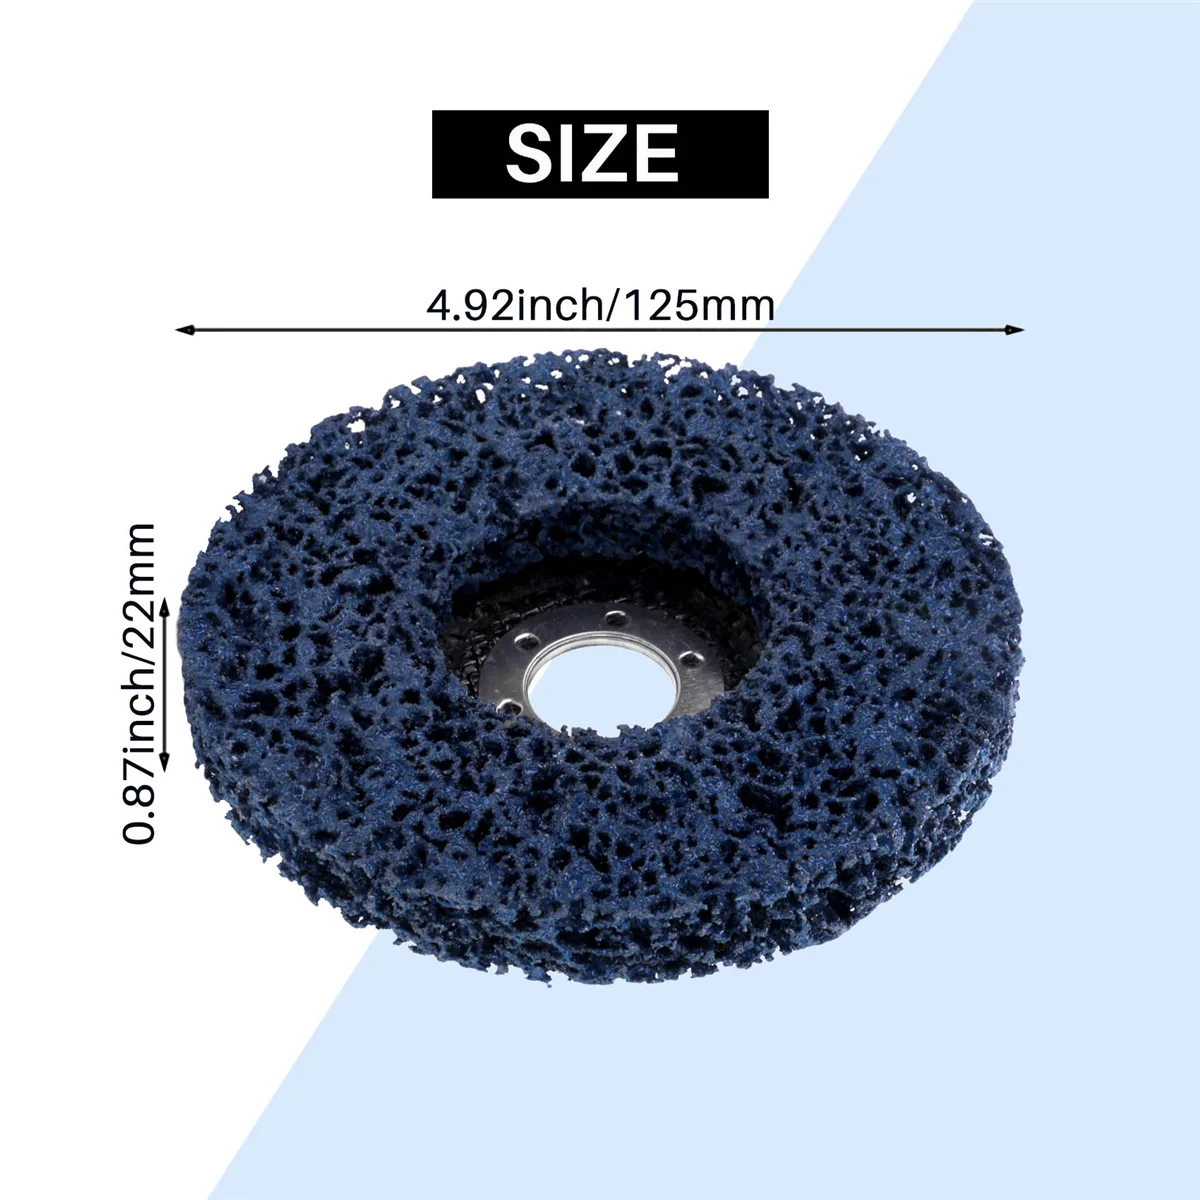 

5Pcs 125mm Diameter Cleaning Strip Wheel Grinding Abrasive Disc for Angle Grinder Paint Rust Grinder Remover Tools